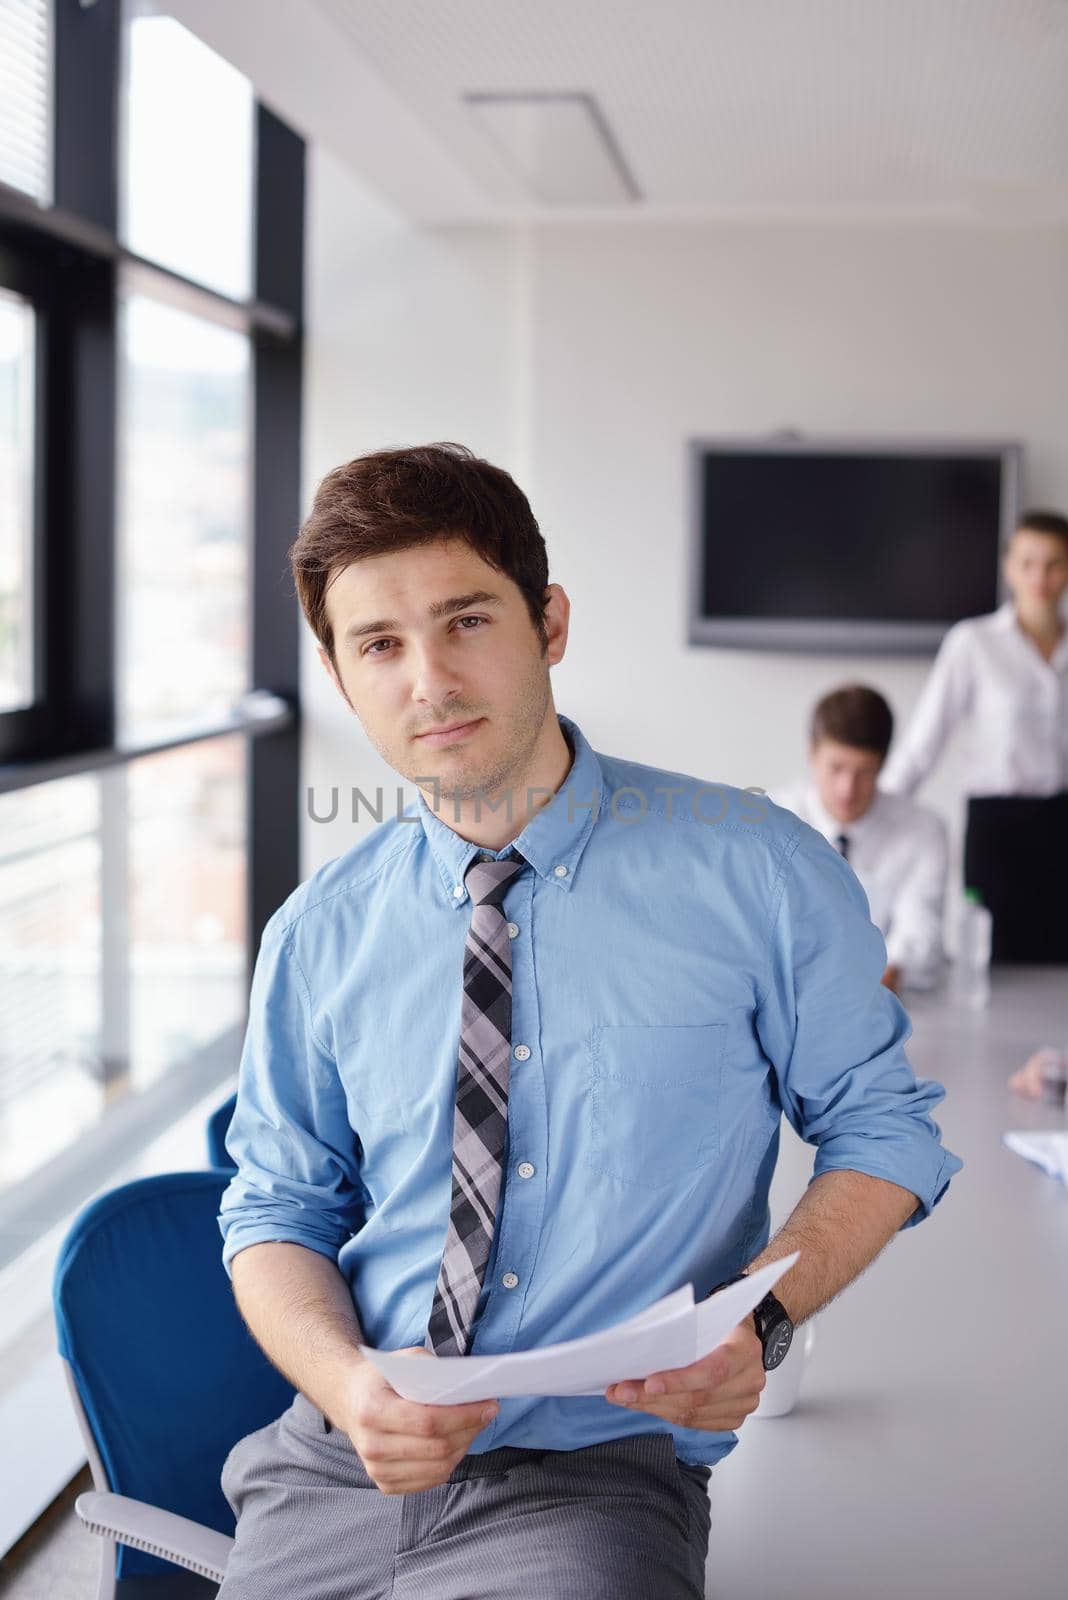 Portrait of a handsome young  business man  on a meeting in offce with colleagues in background